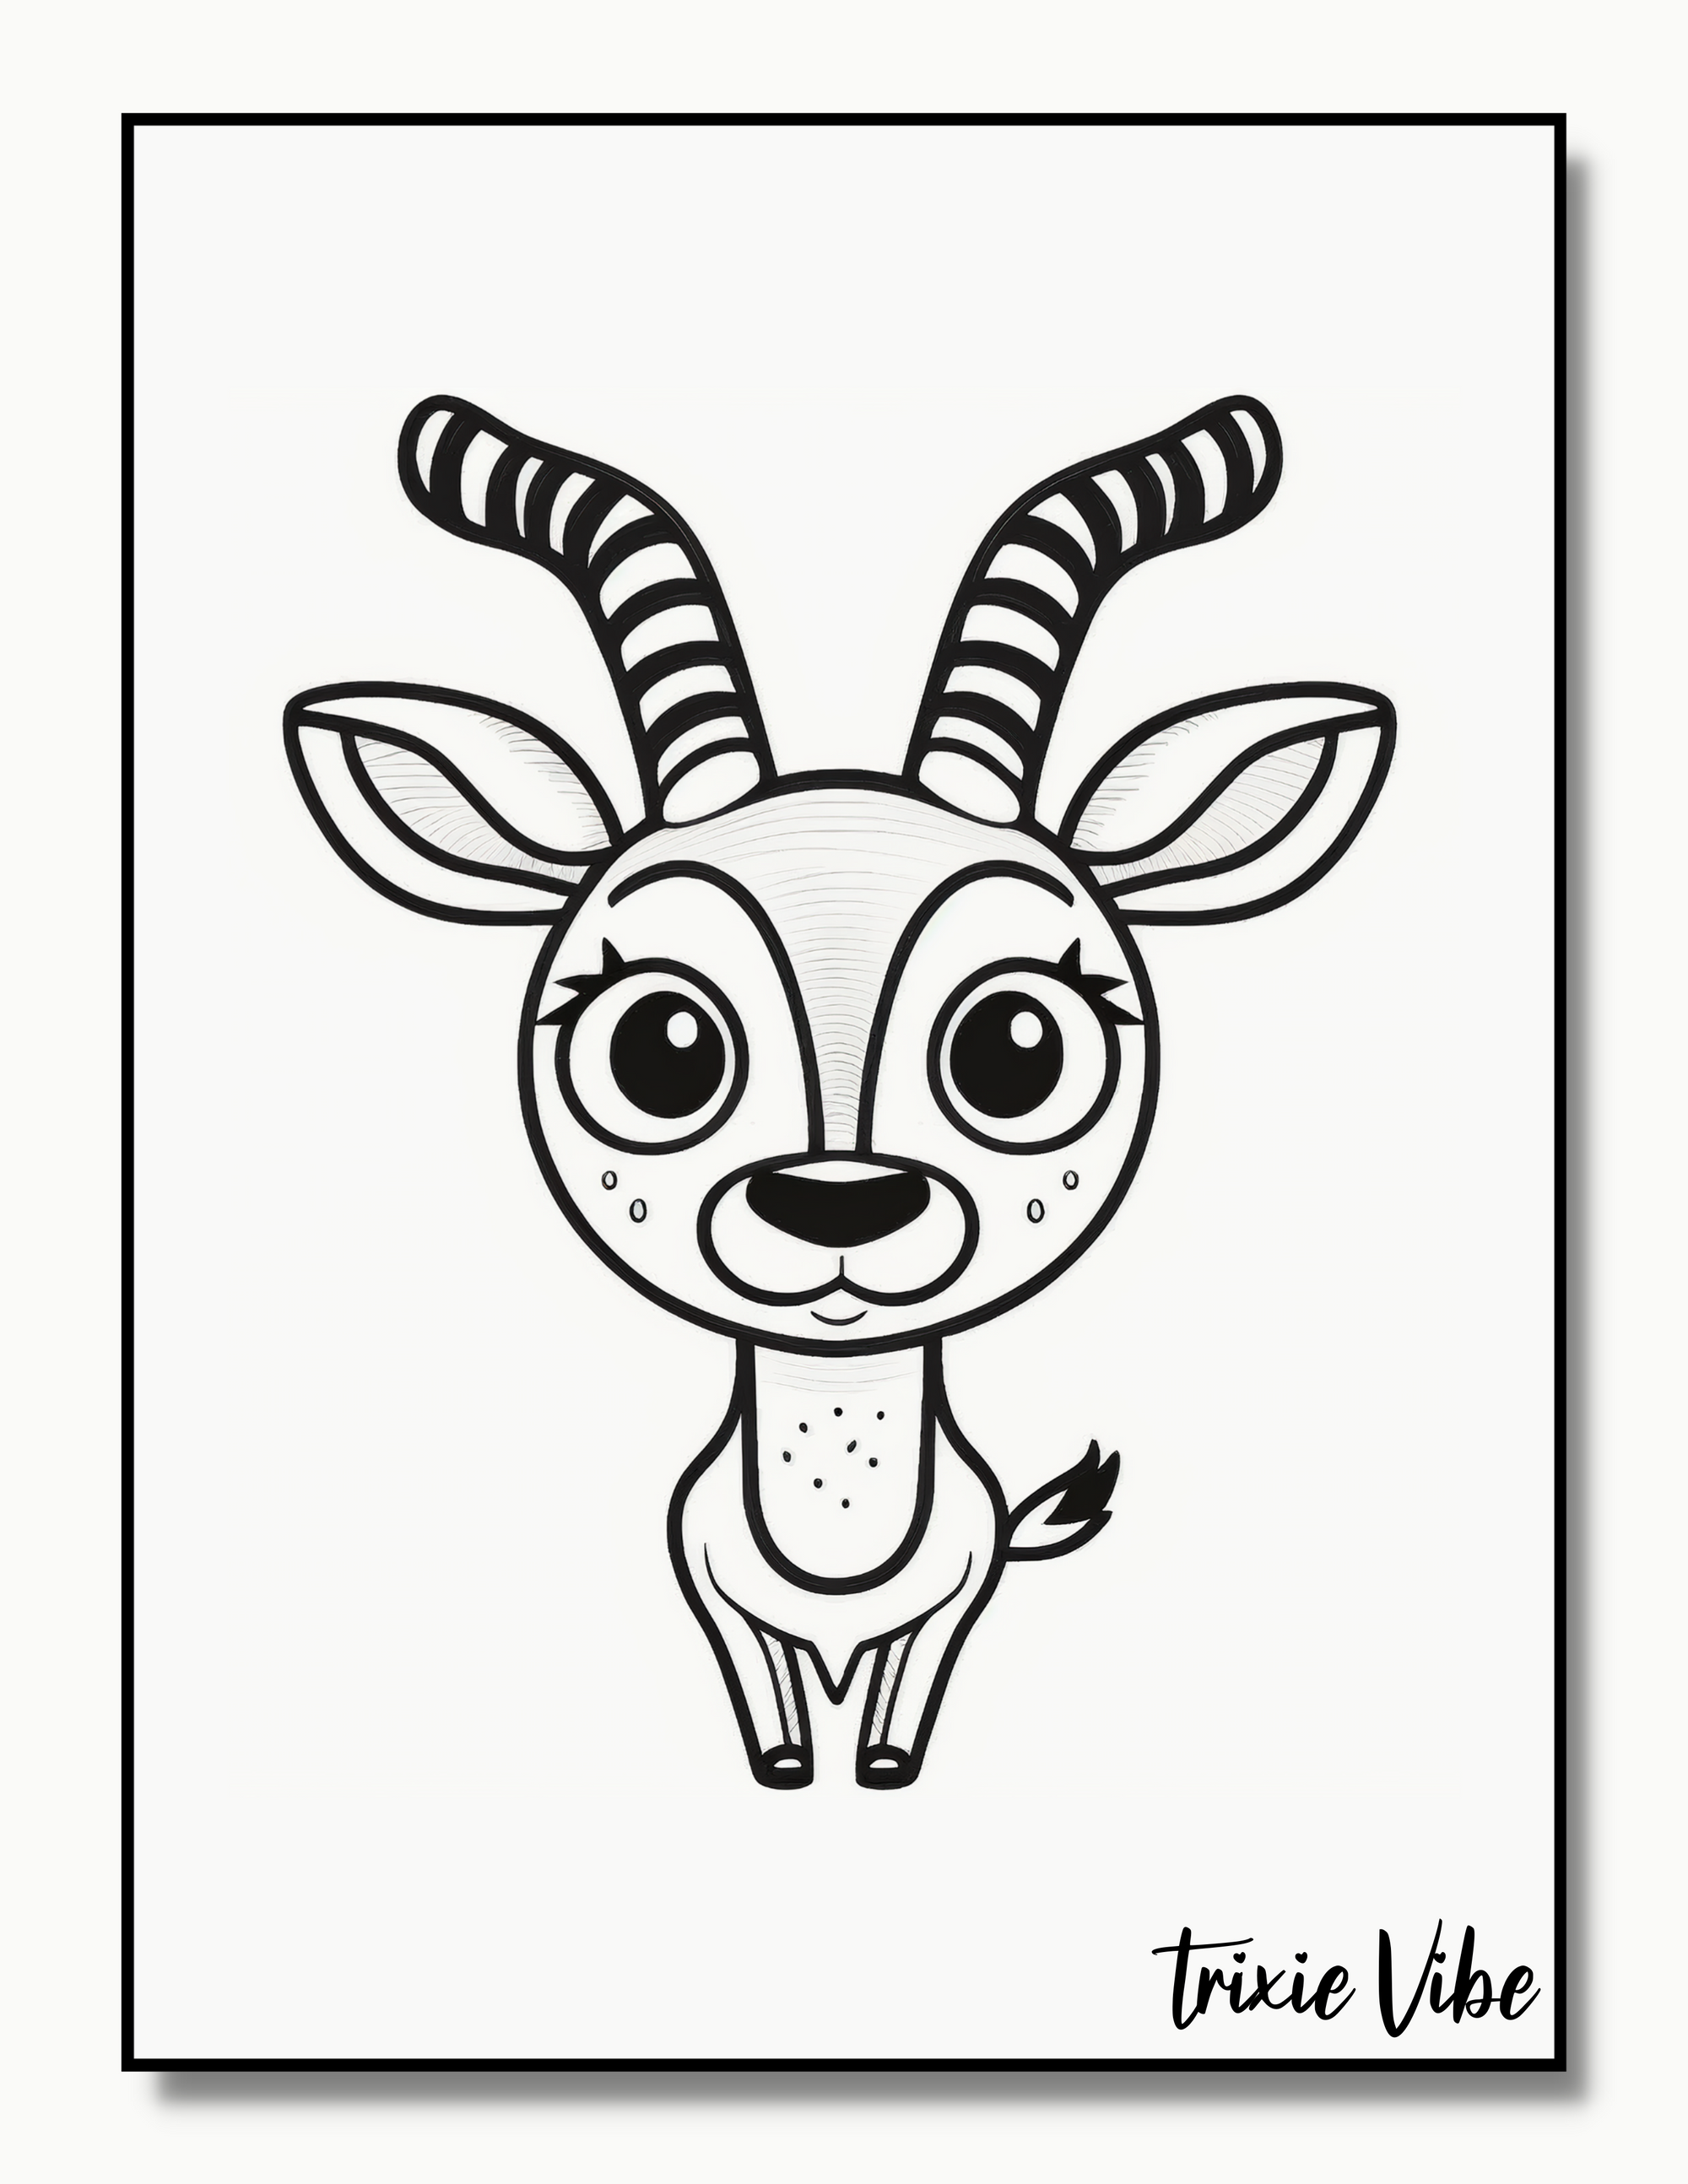 Gazelle Coloring Pages for Kids